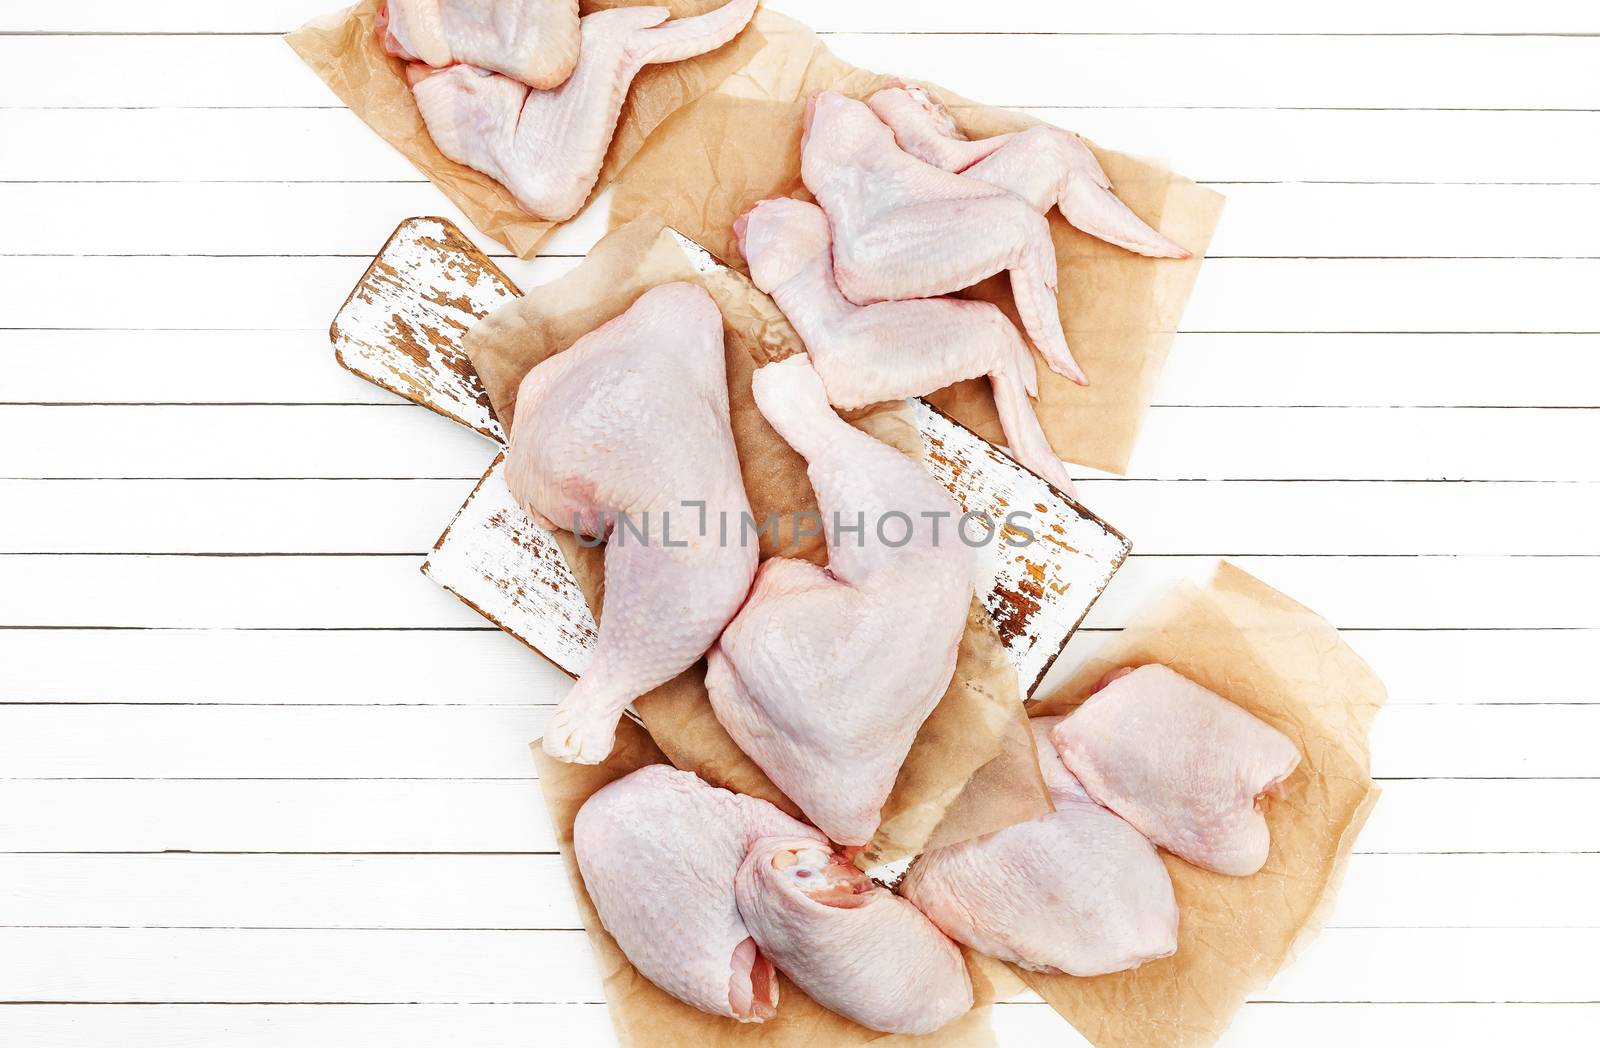 Raw chicken meat on cutting board on white wooden background. Top view by xamtiw